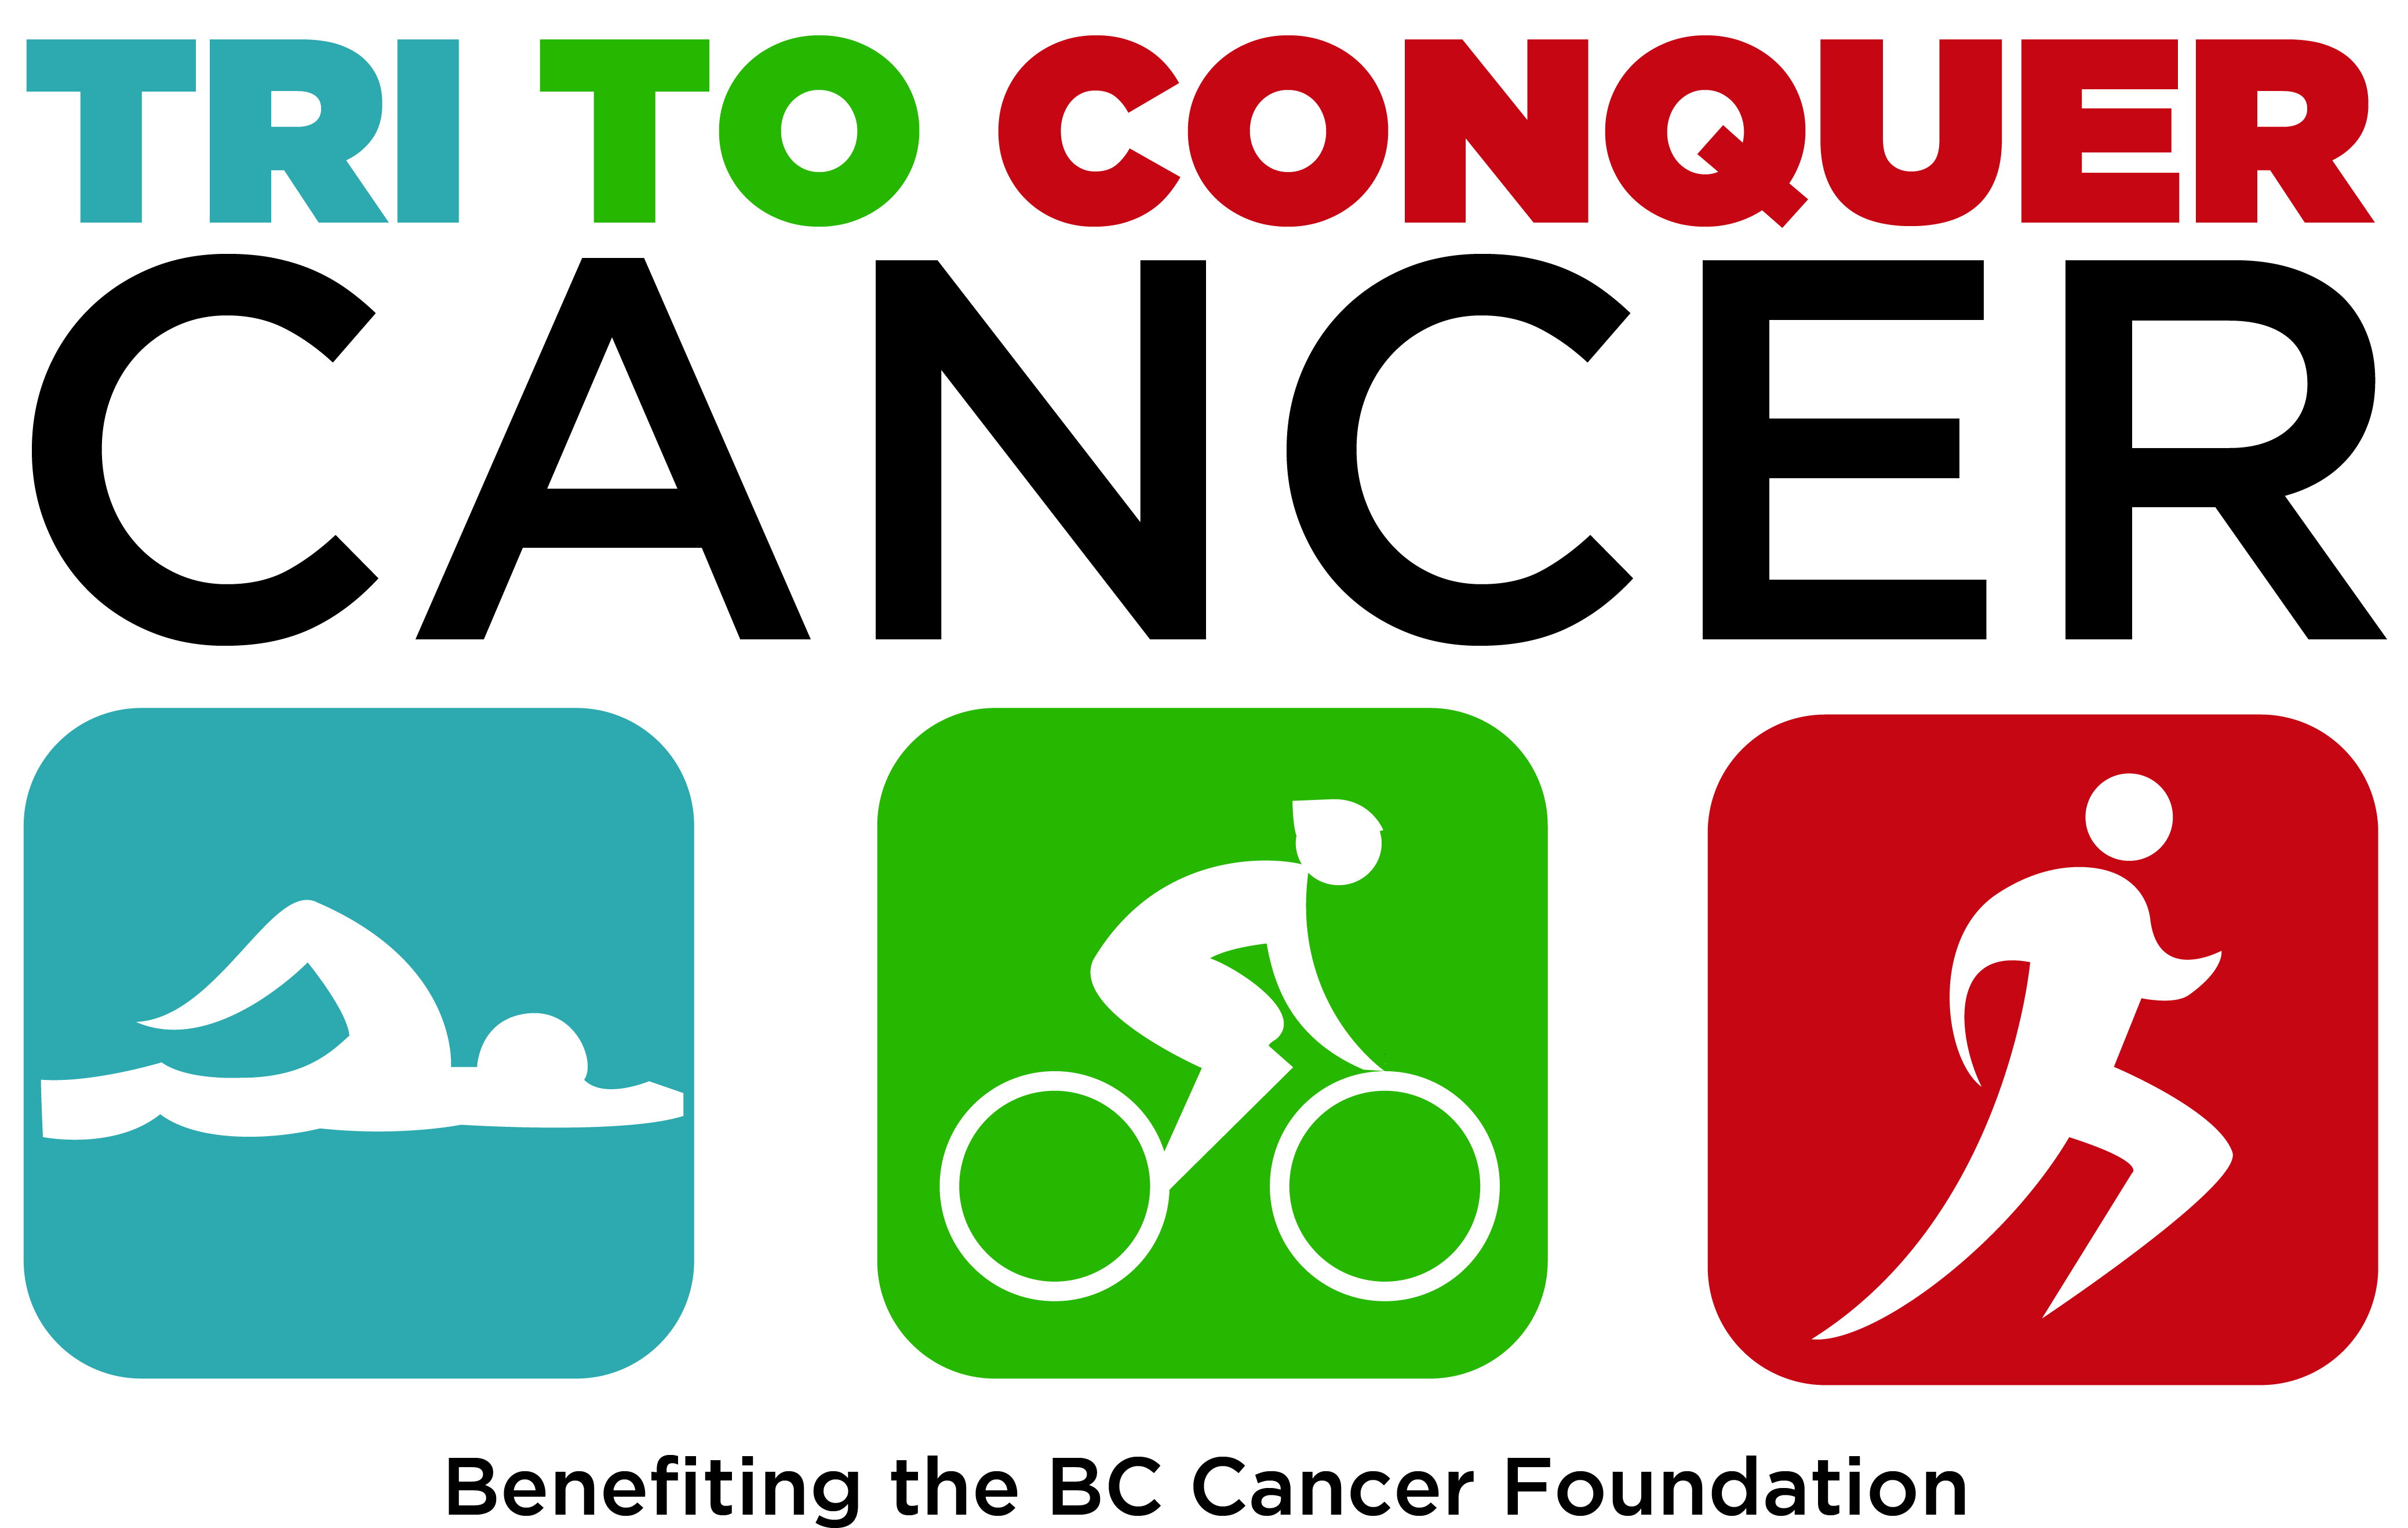 Tri to Conquer Cancer - fundraiser for BC Cancer Foundation